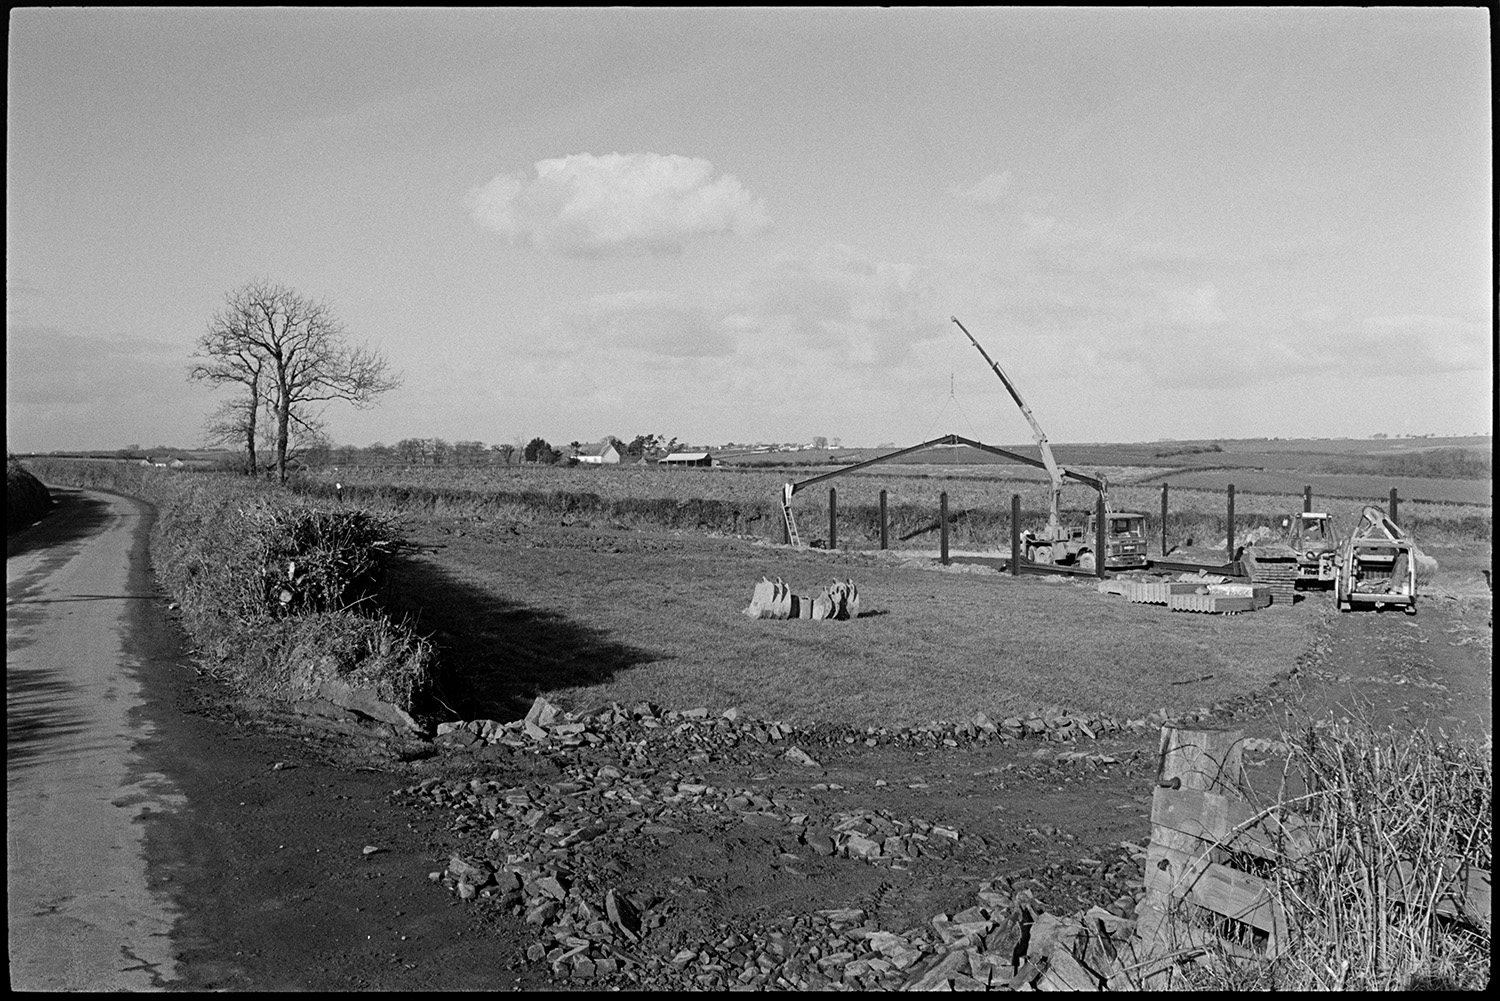 Crane erecting new barn in field. 
[A crane putting up the metal frame of a barn in a muddy field in Ashreigney.  Buckets for a digger can be seen in the foreground and farm buildings are visible in the background.]